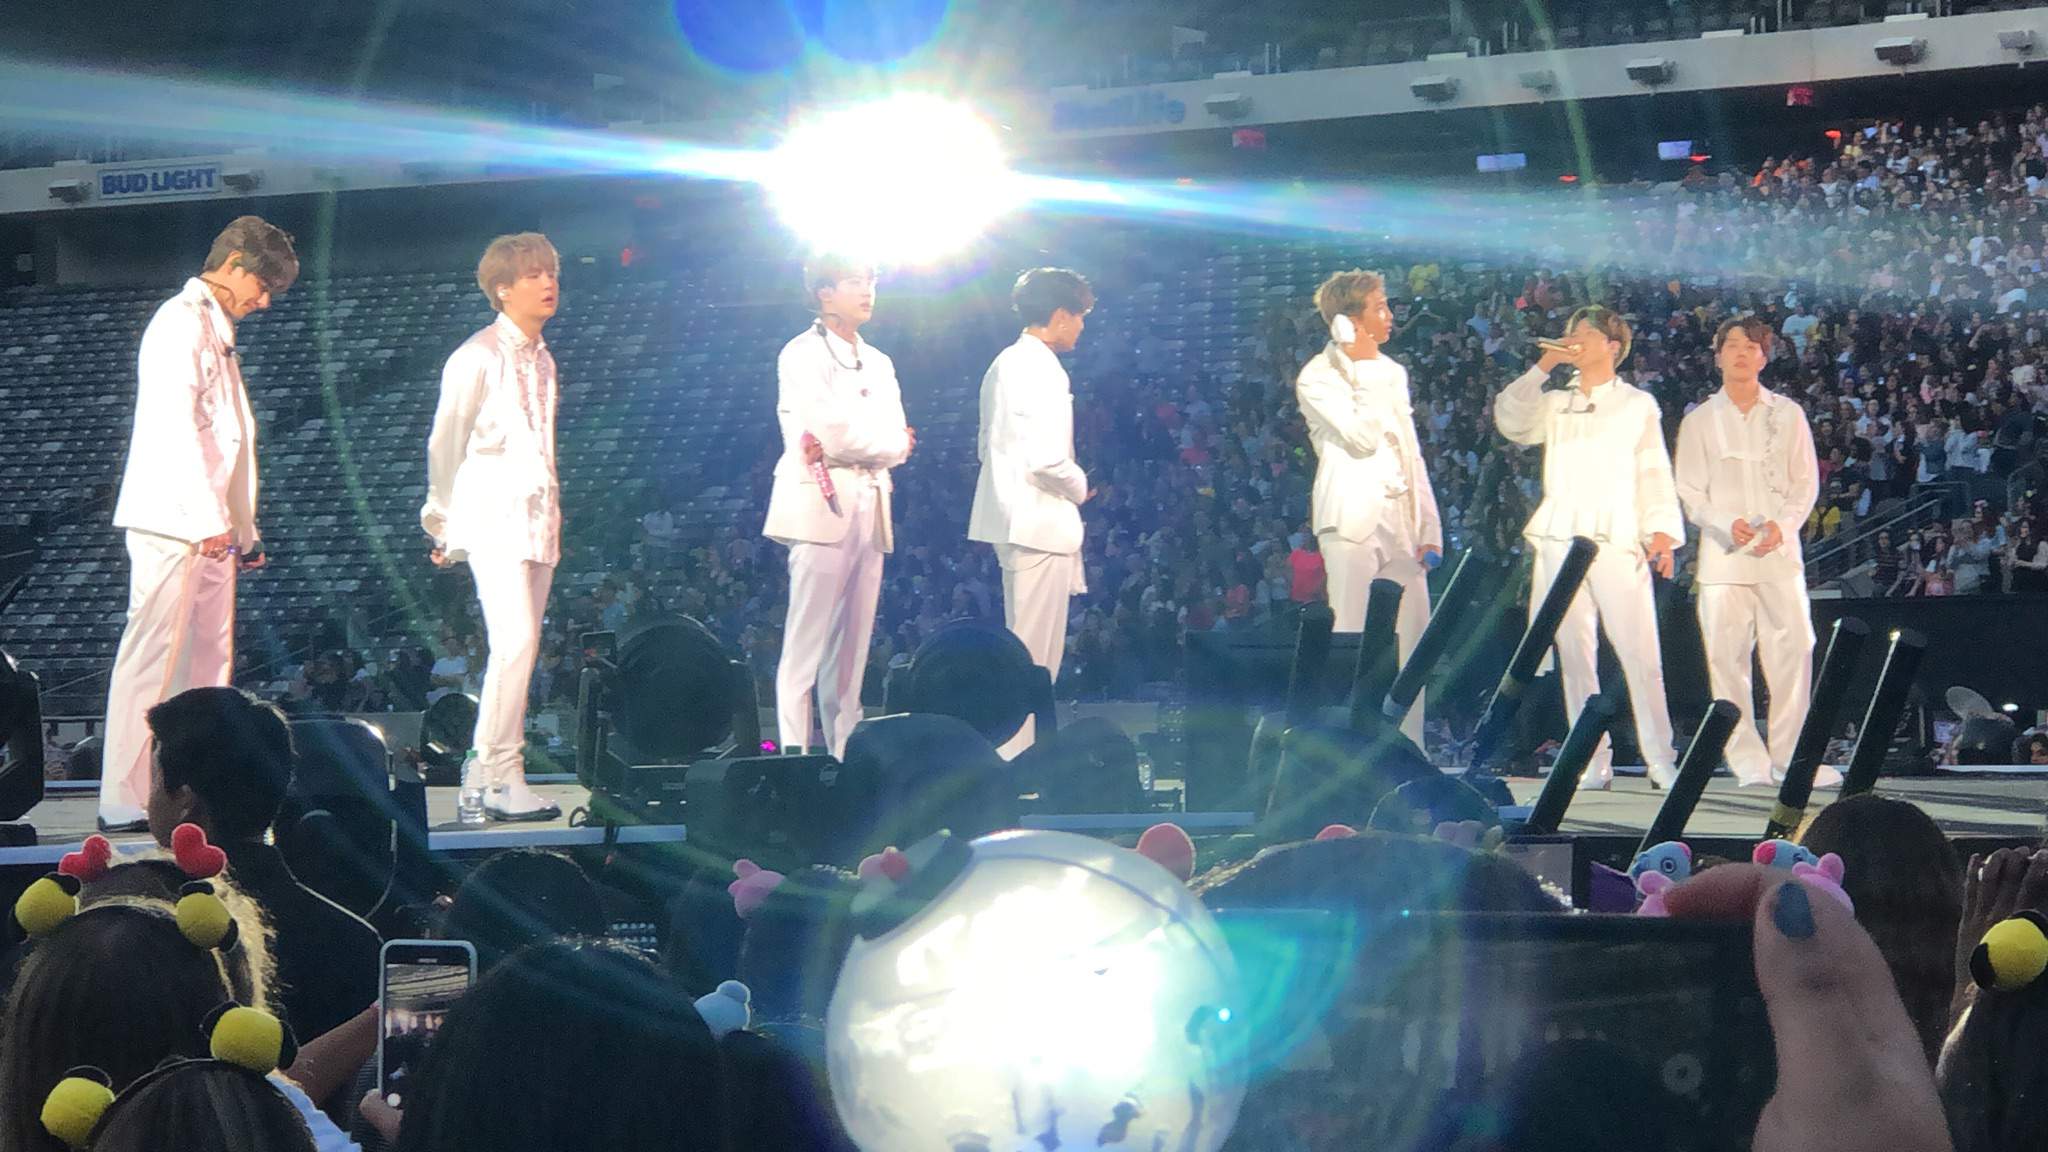 My experience at BTS Concert at Metlife Stadium in New Jersey V K O O